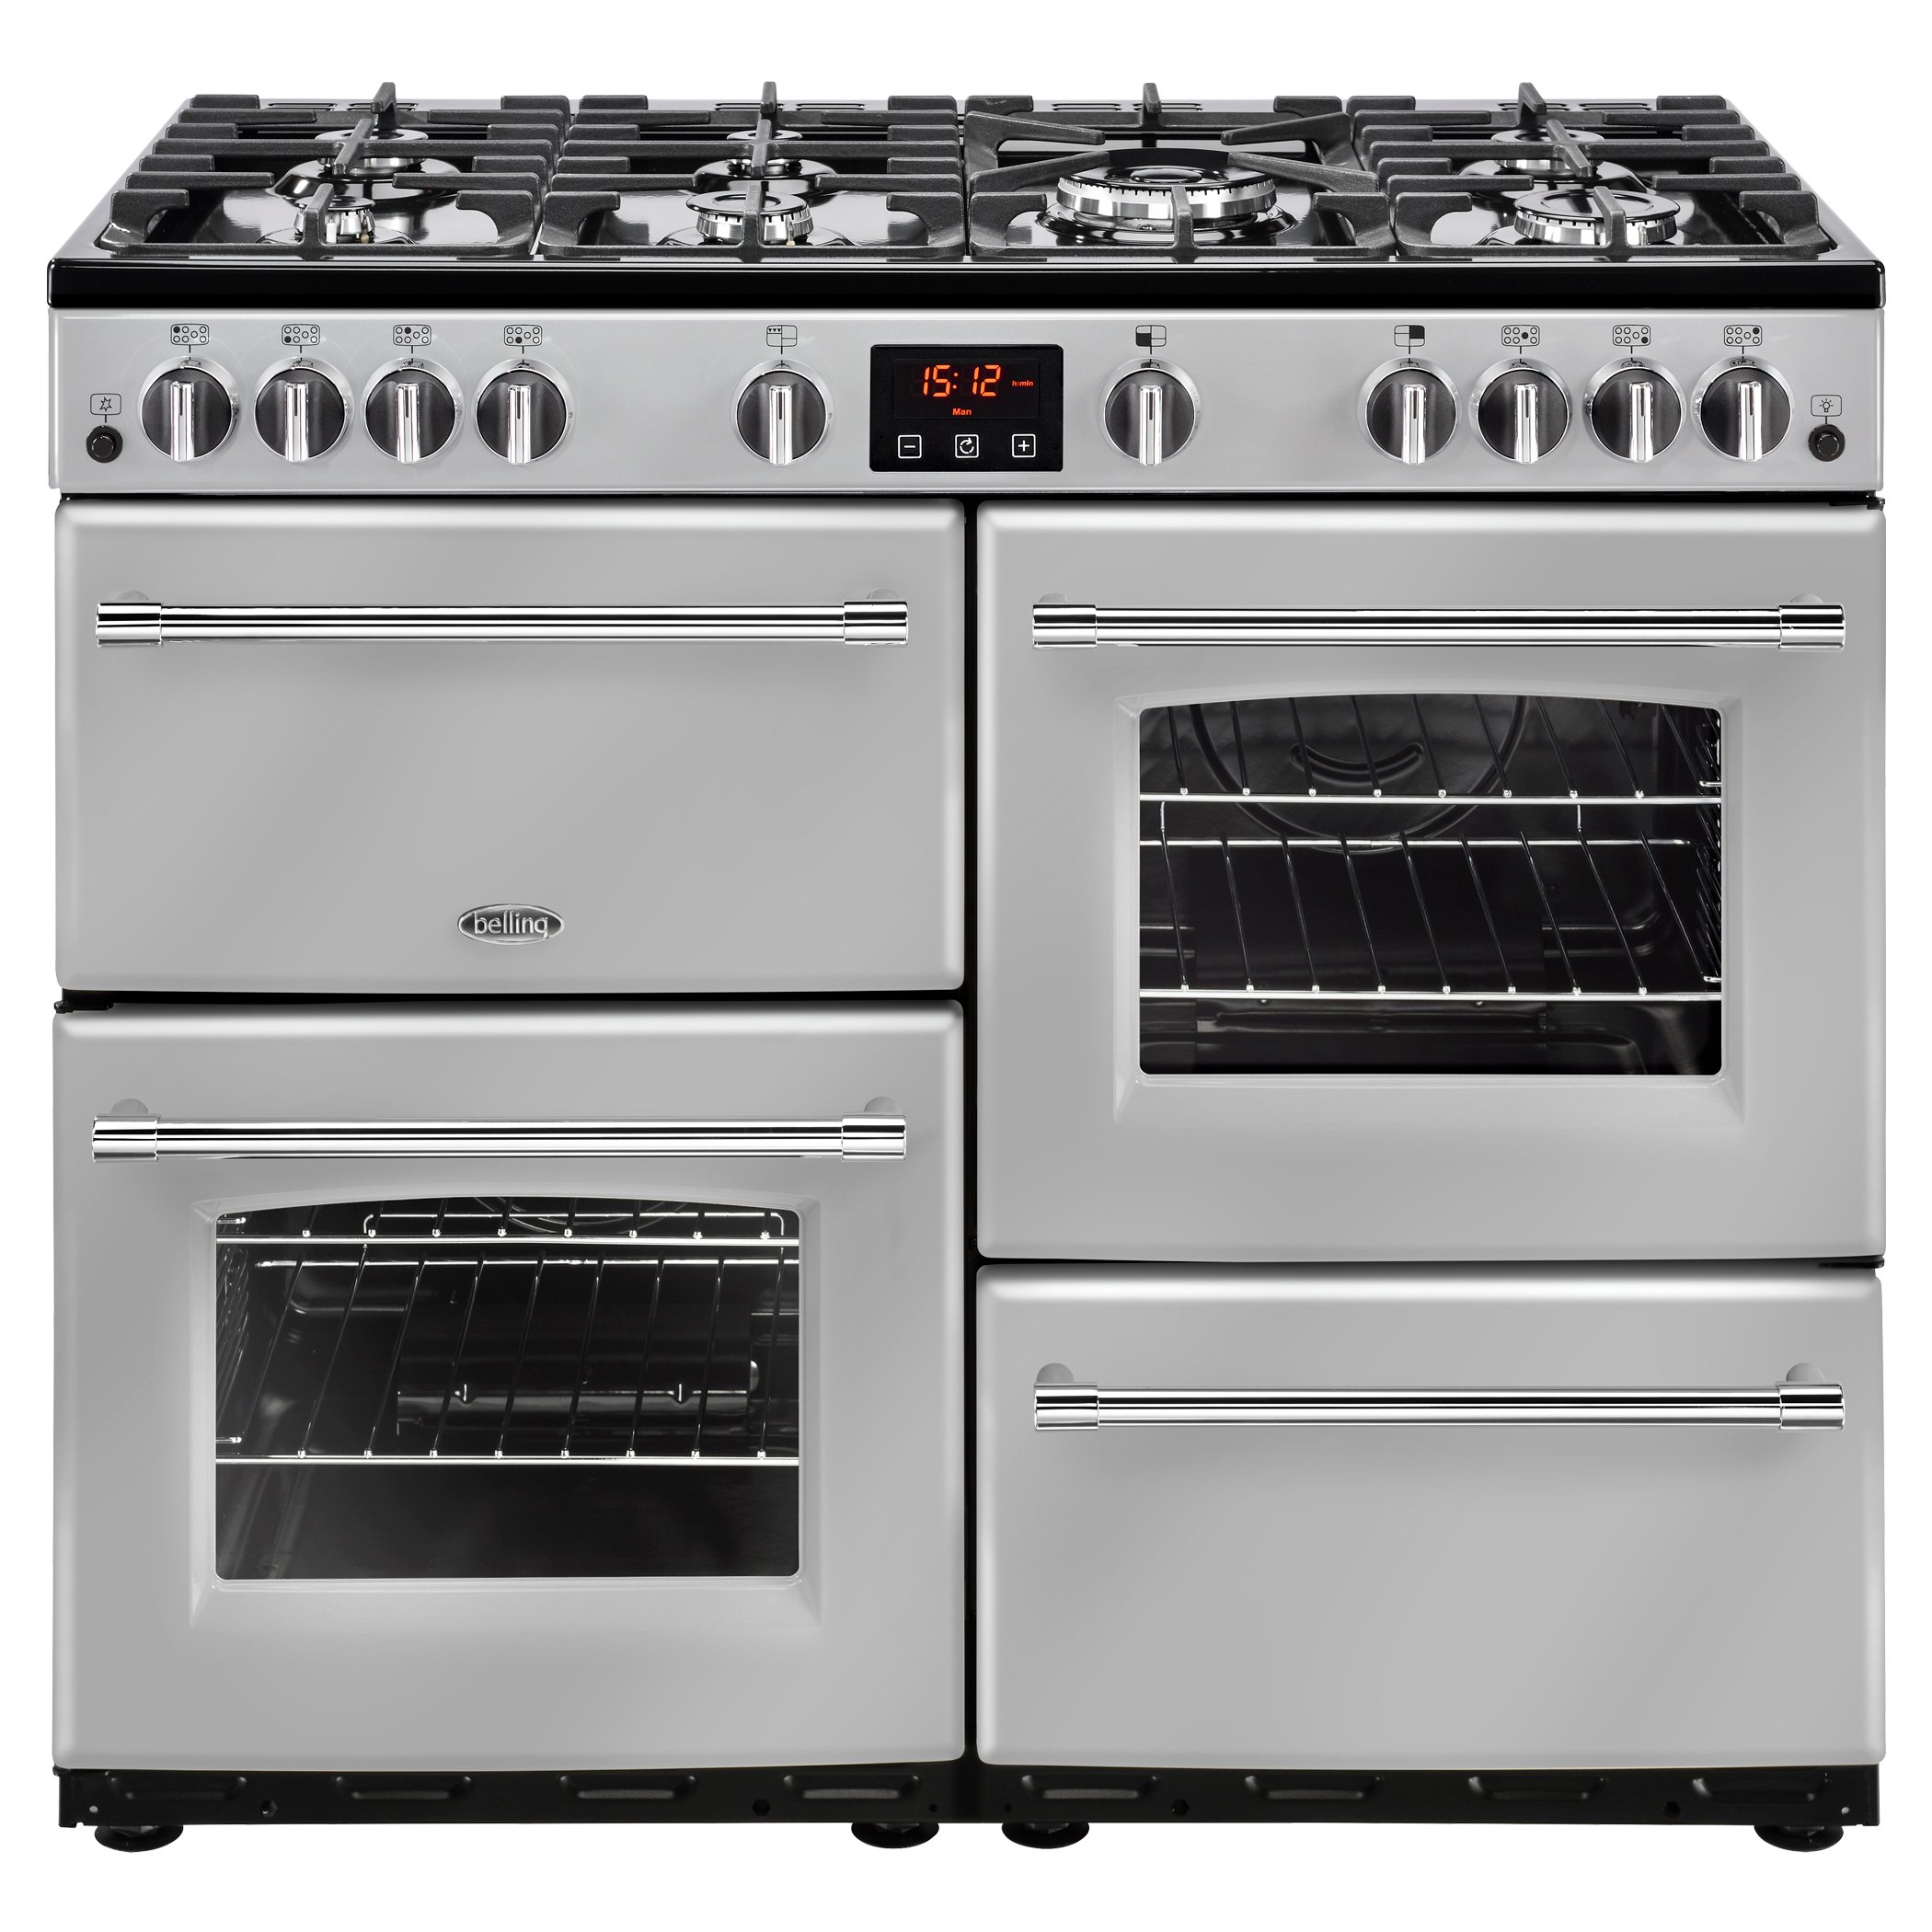 100cm gas range cooker with 7 burner gas hob with 4kW PowerWok™ burner, Maxi-Clock and easy clean enamel.